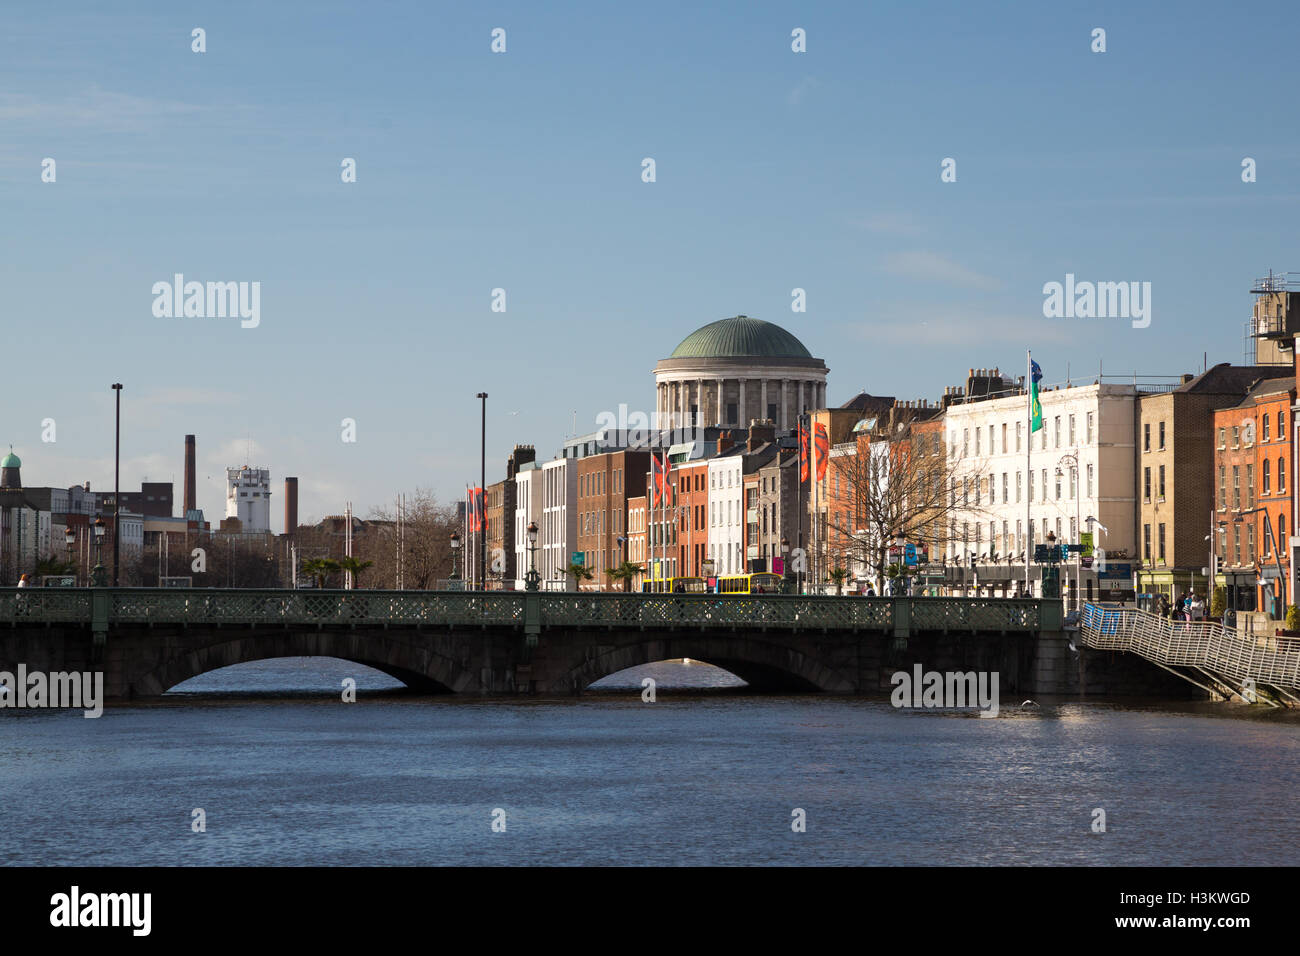 The Four Courts in Dublin City, Ireland Stock Photo